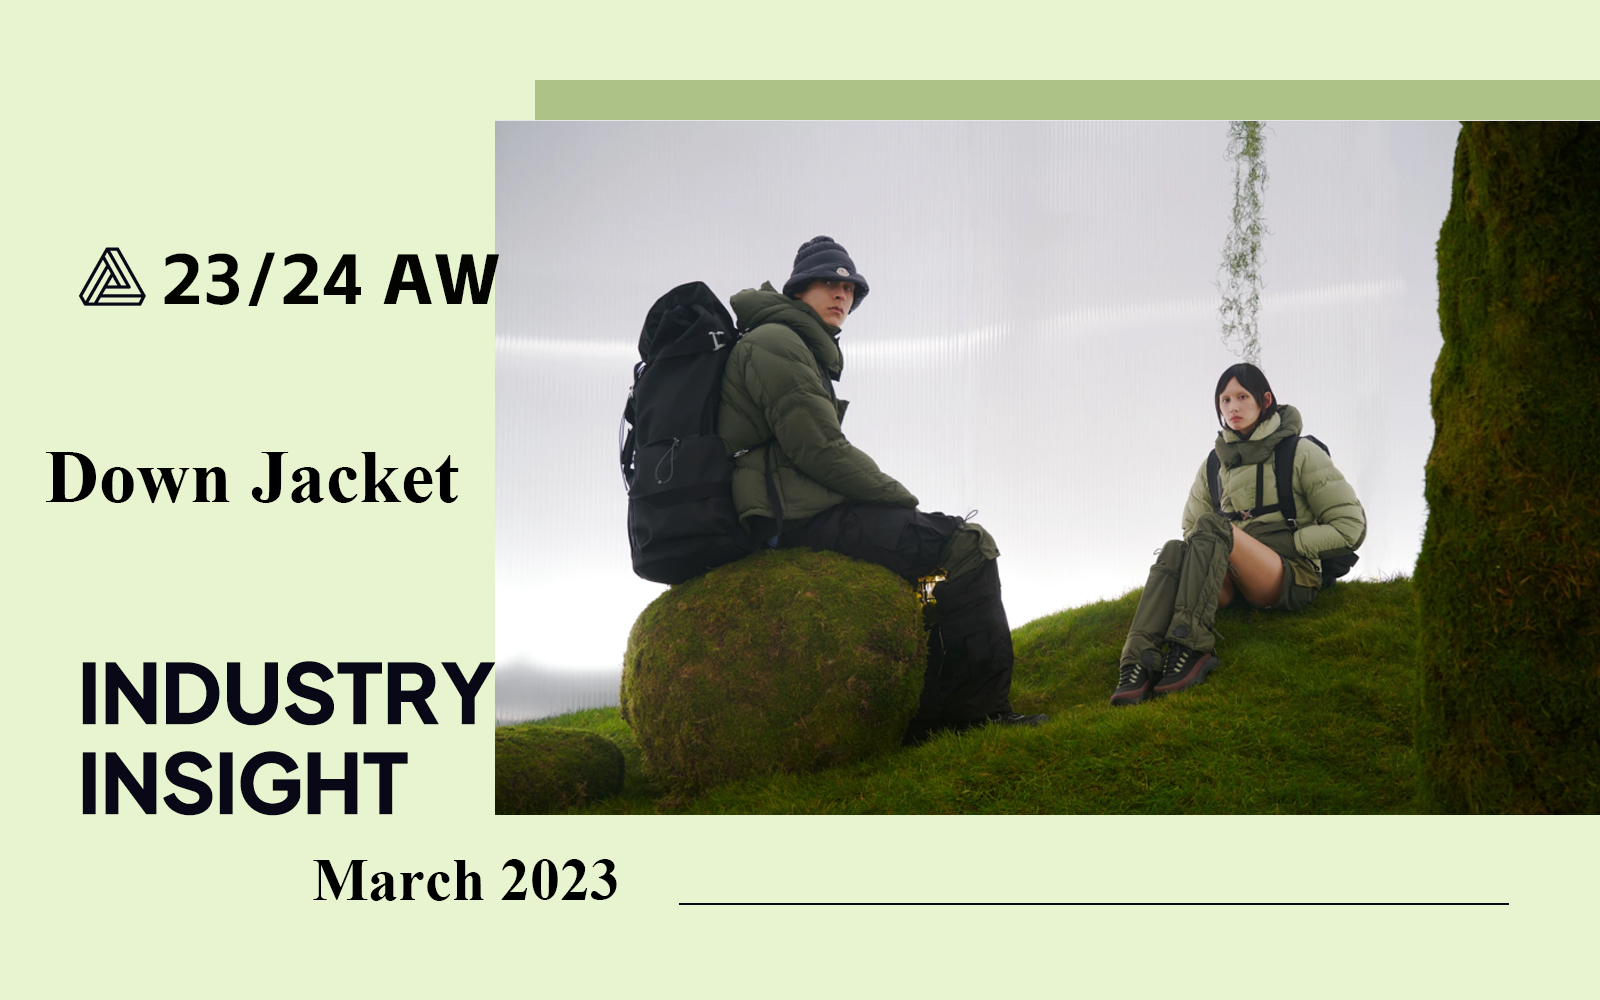 March 2023 -- The Industry Insight of Down Jacket